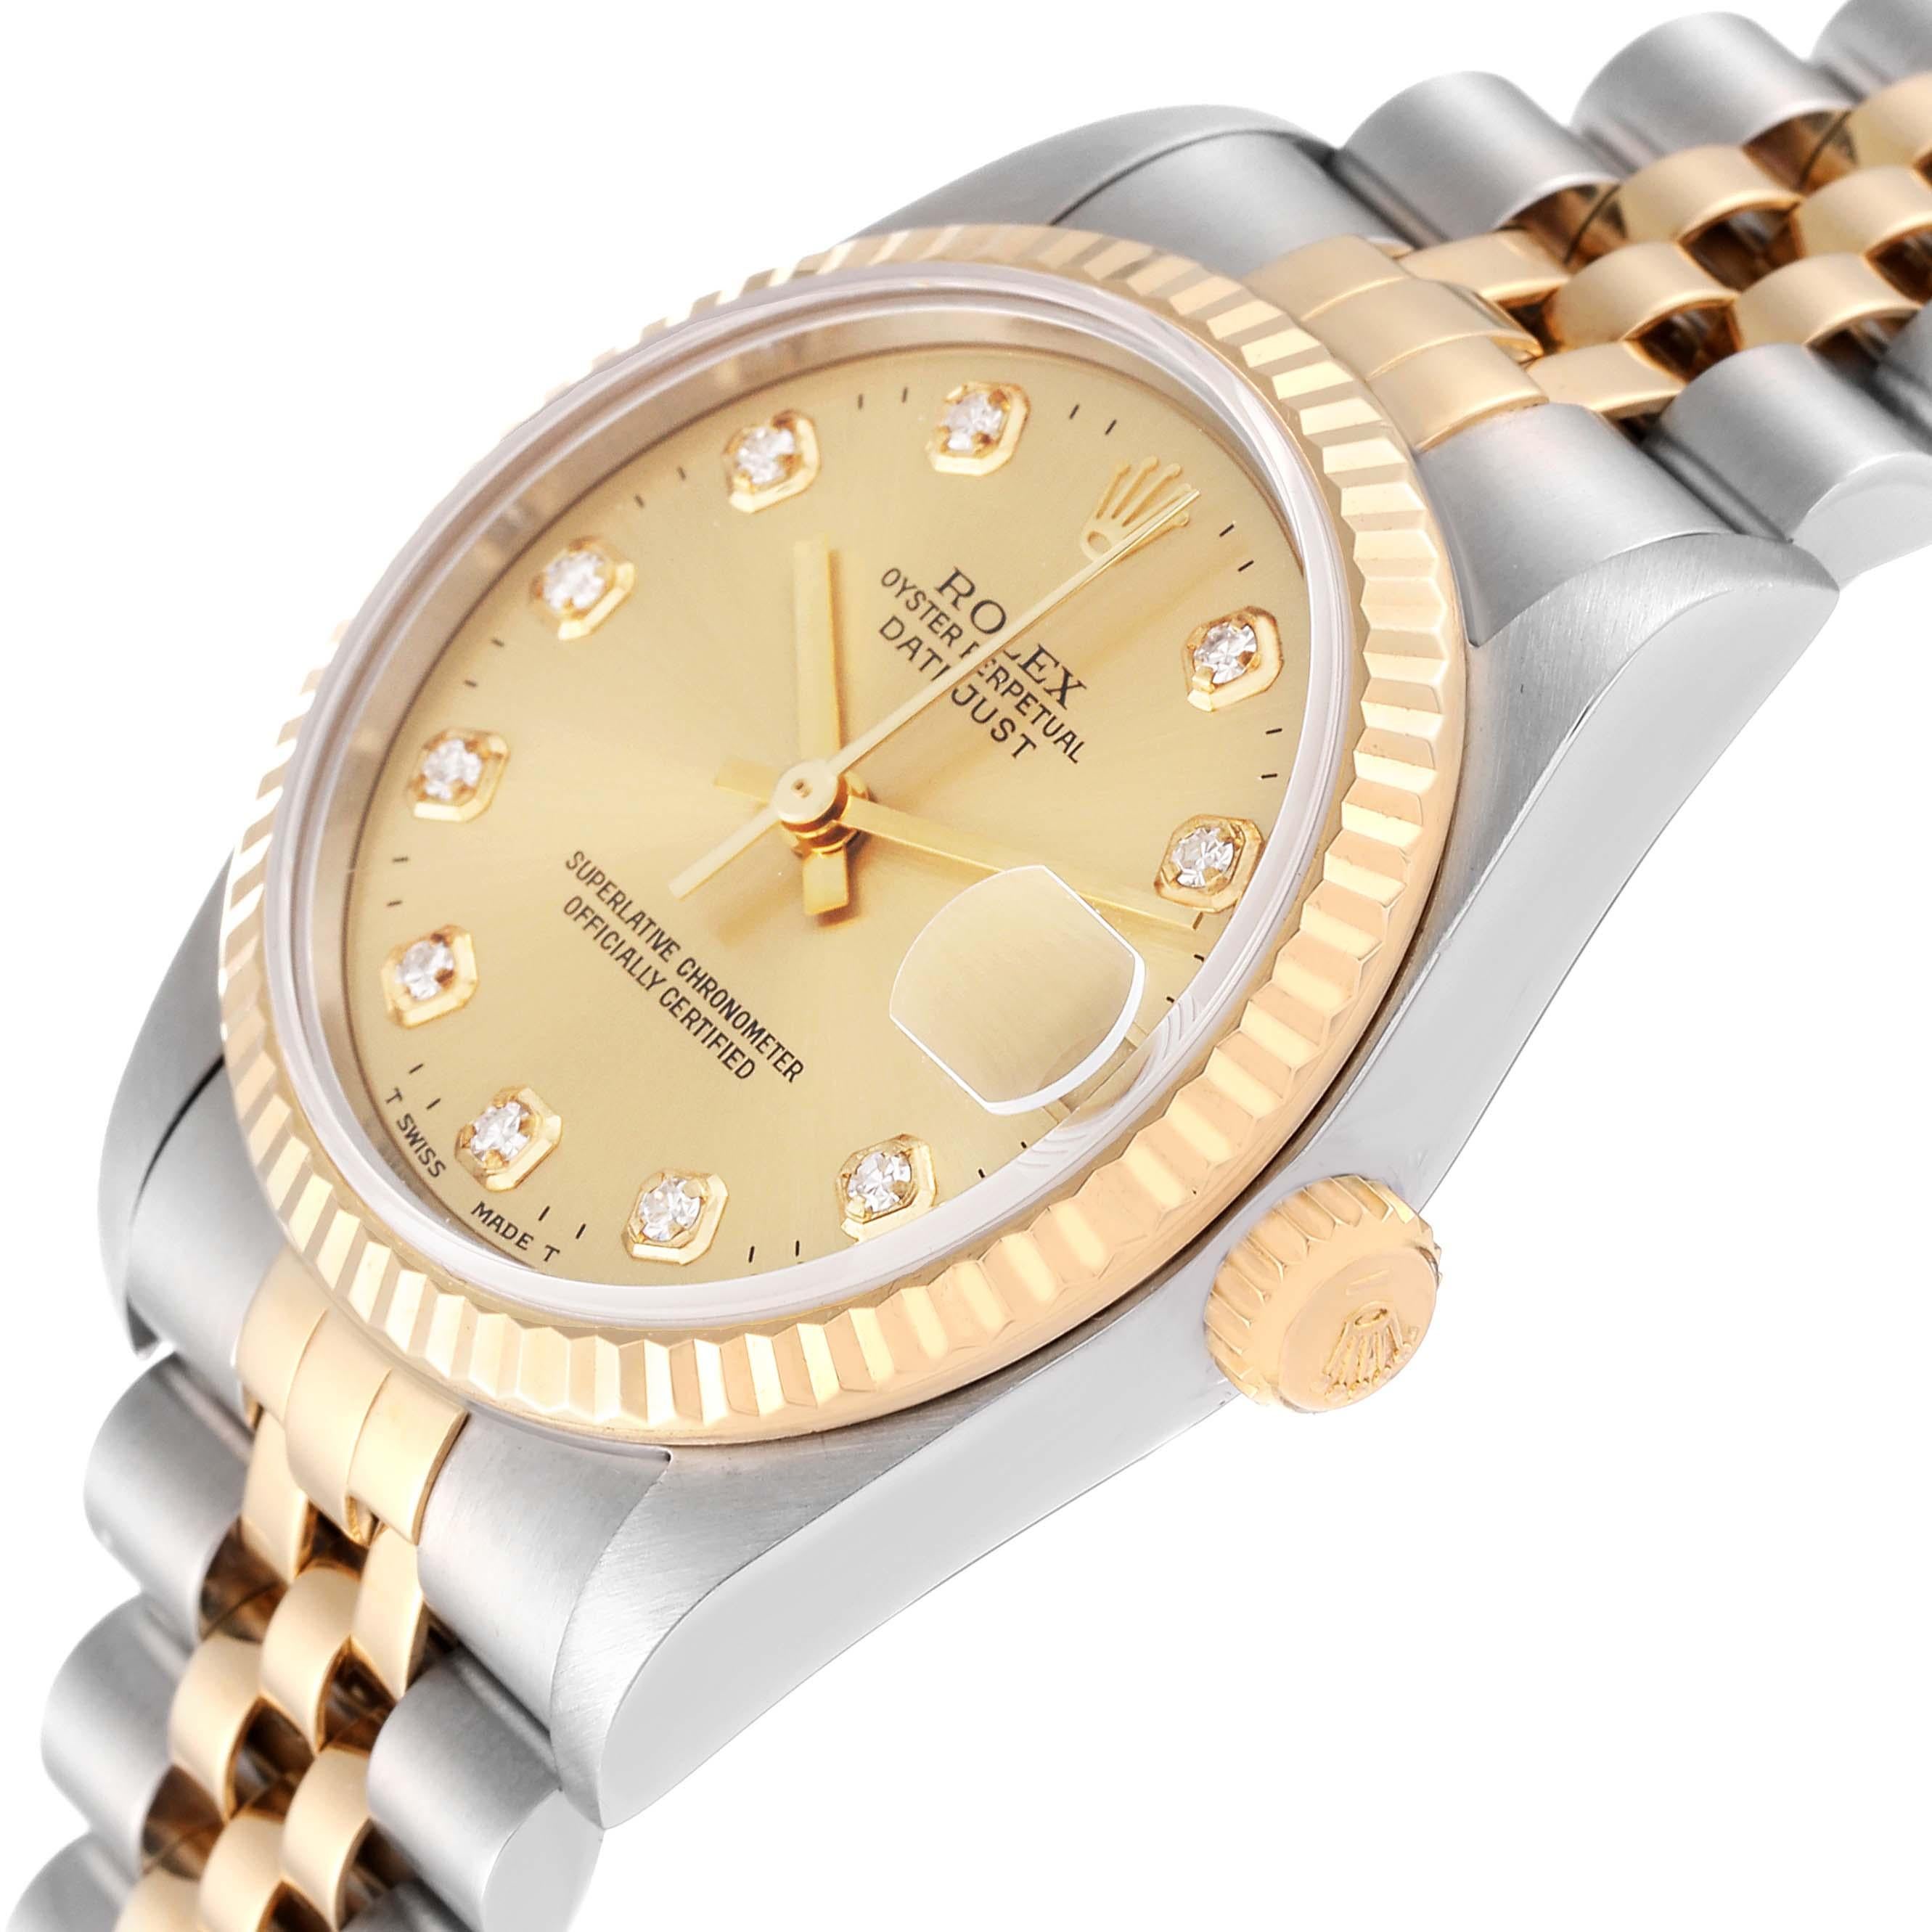 Rolex Datejust Midsize Diamond Dial Steel Yellow Gold Ladies Watch 68273 For Sale 1